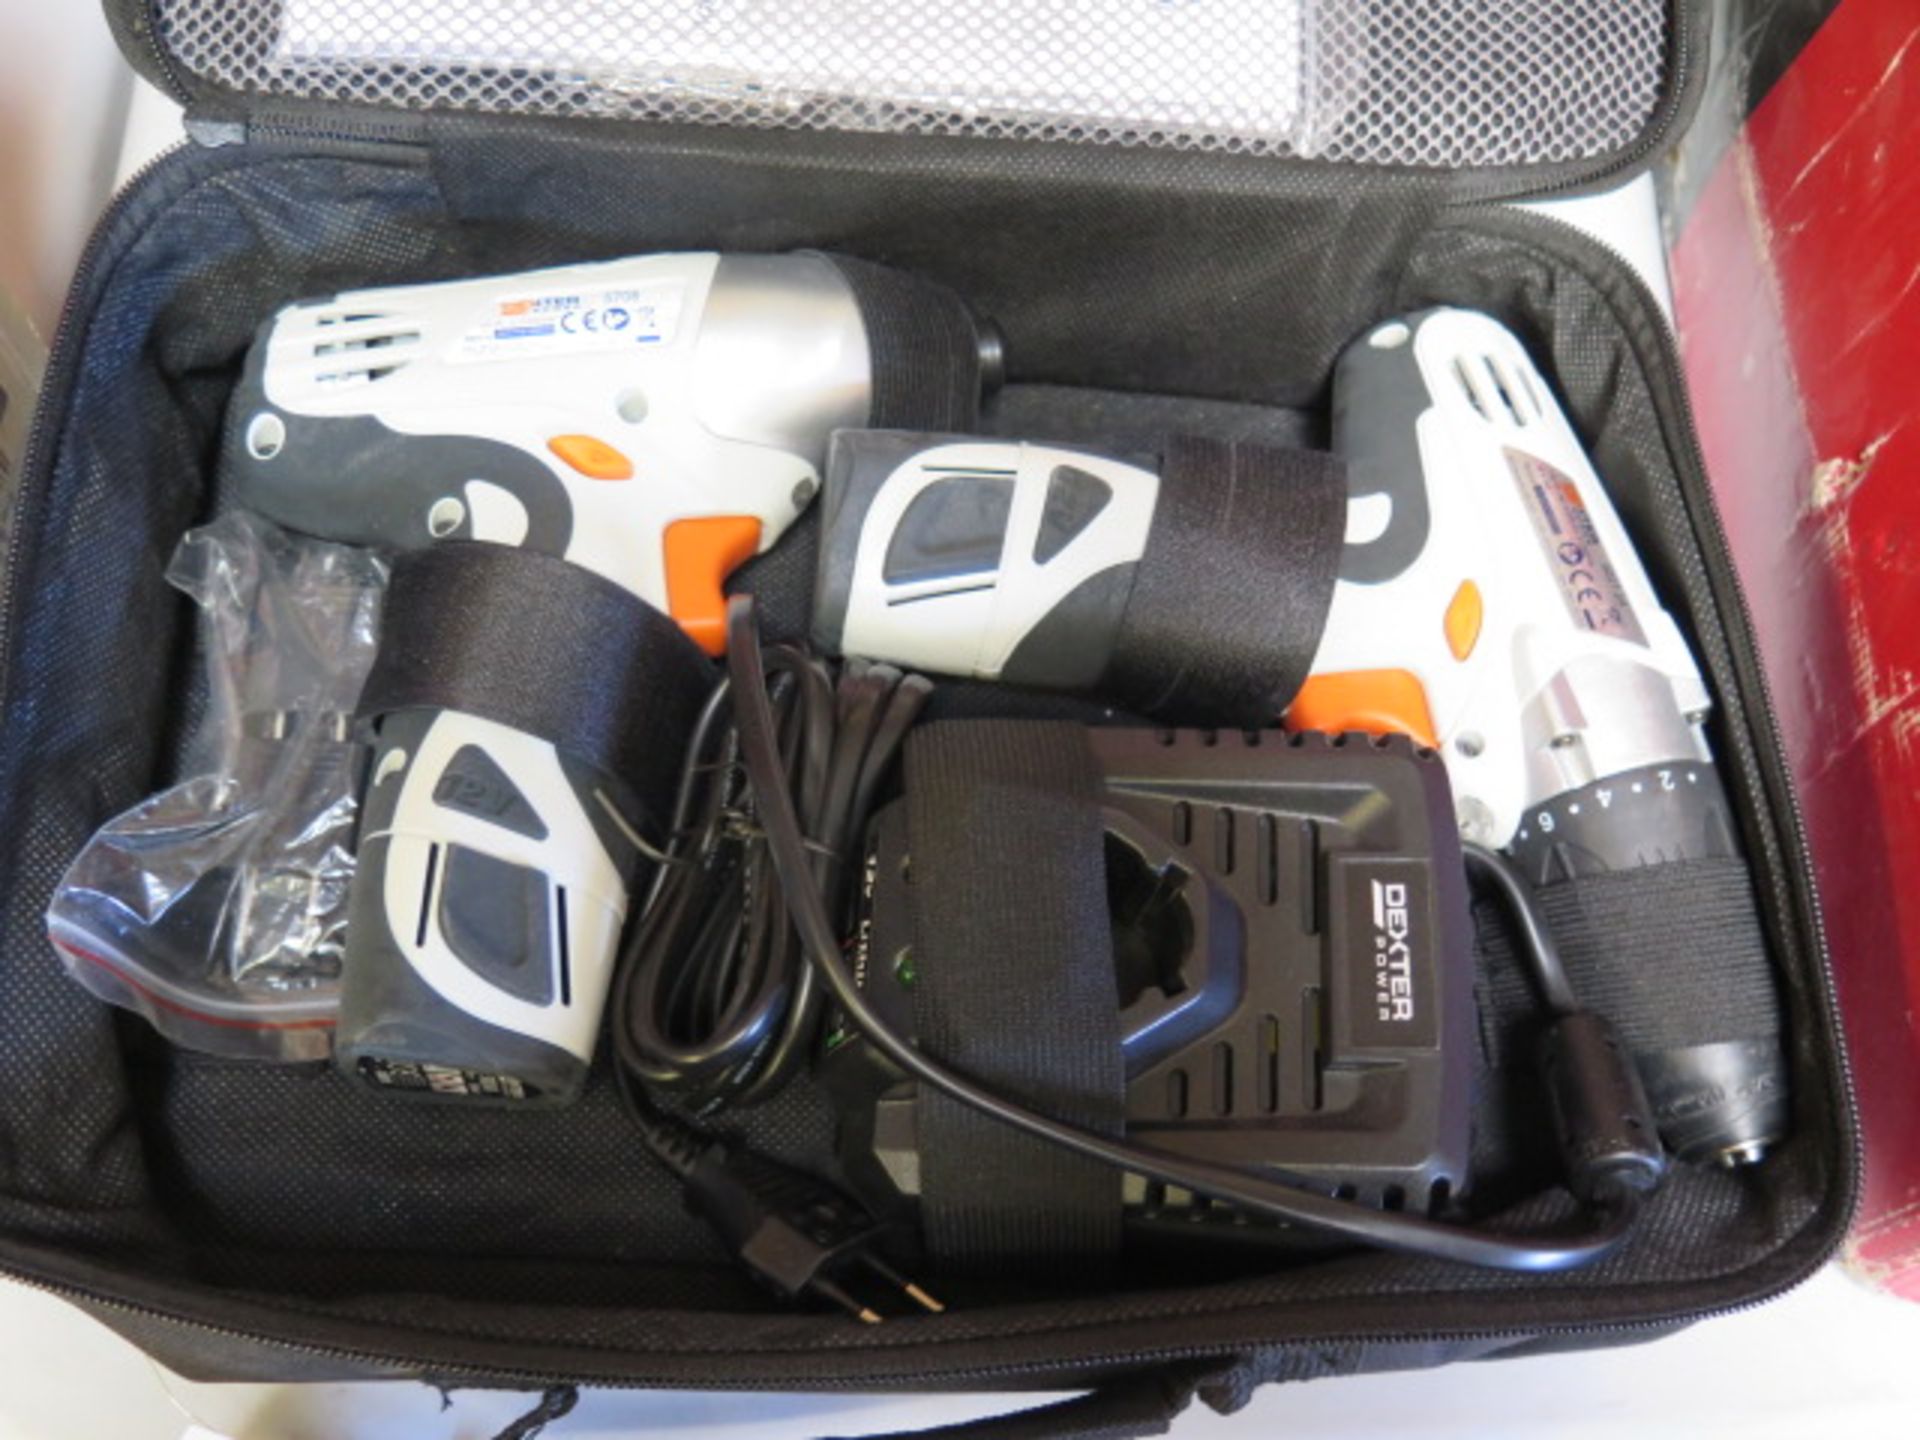 Dexter Cordless Drill and Nut Driver Set w/ Charger (SOLD AS-IS - NO WARRANTY) - Image 3 of 8